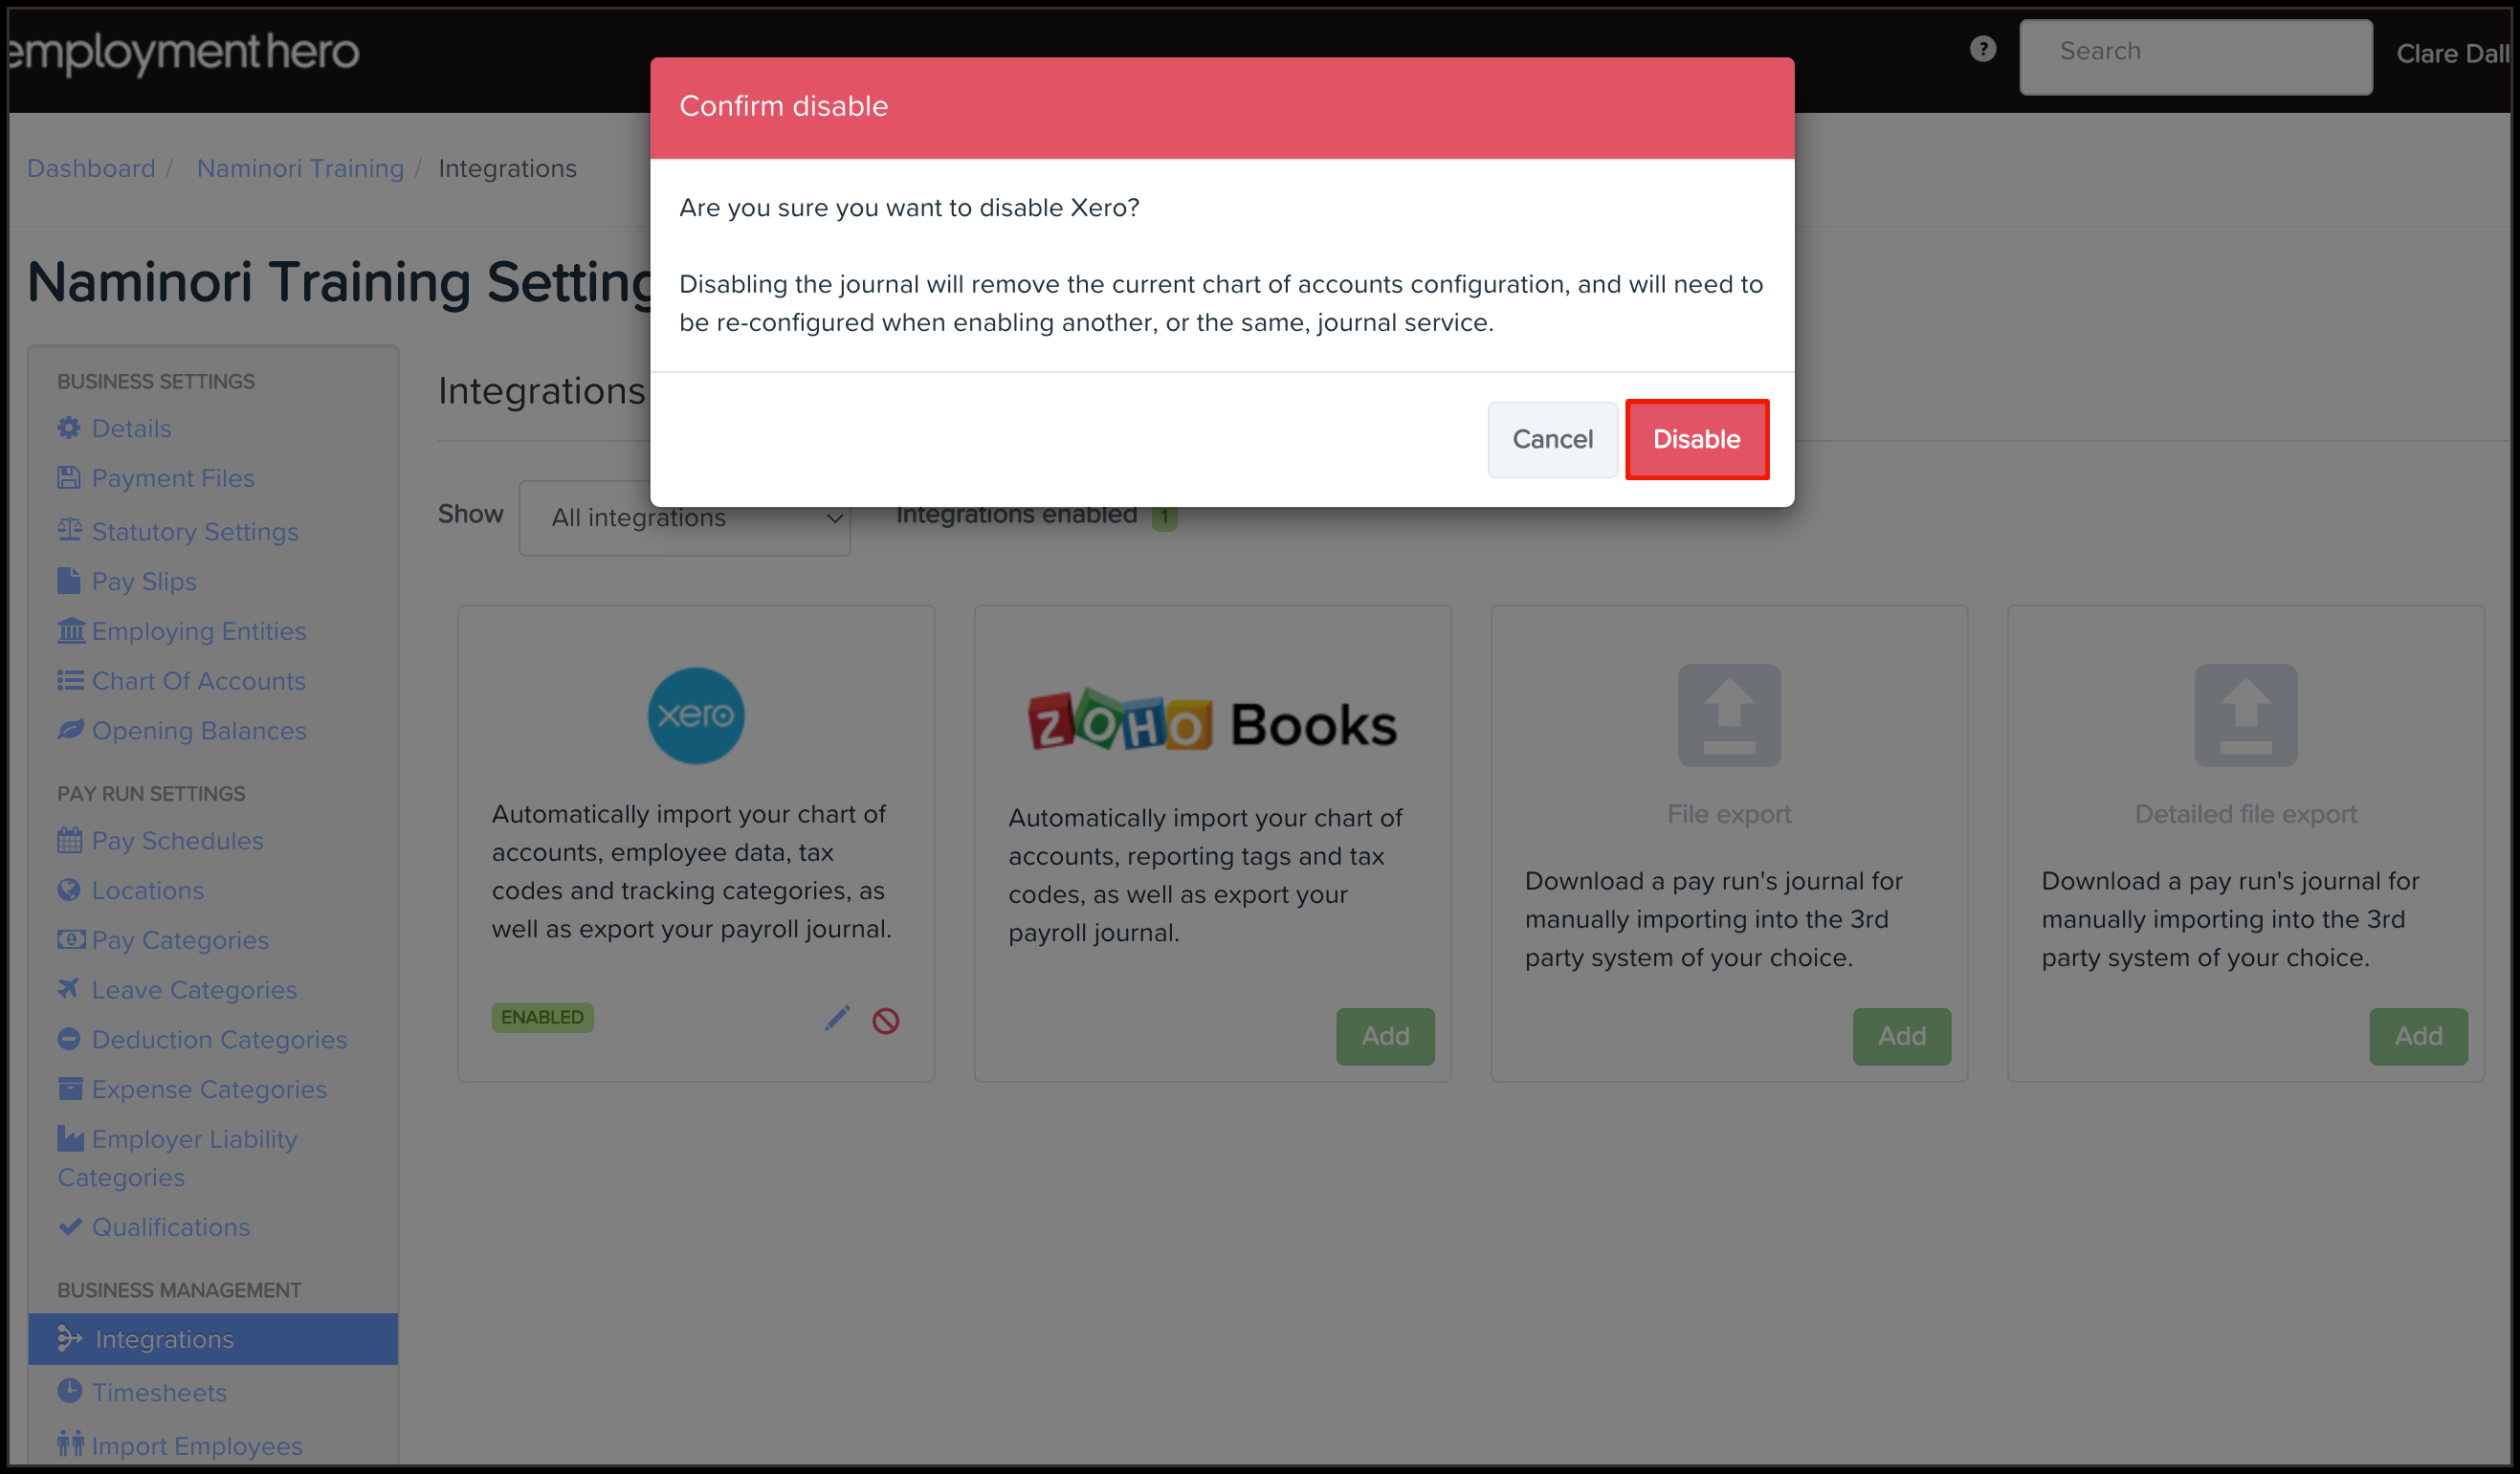 Screenshot of popup to confirm you wish to disable the xero integration. There is a button to disable or the option to cancel